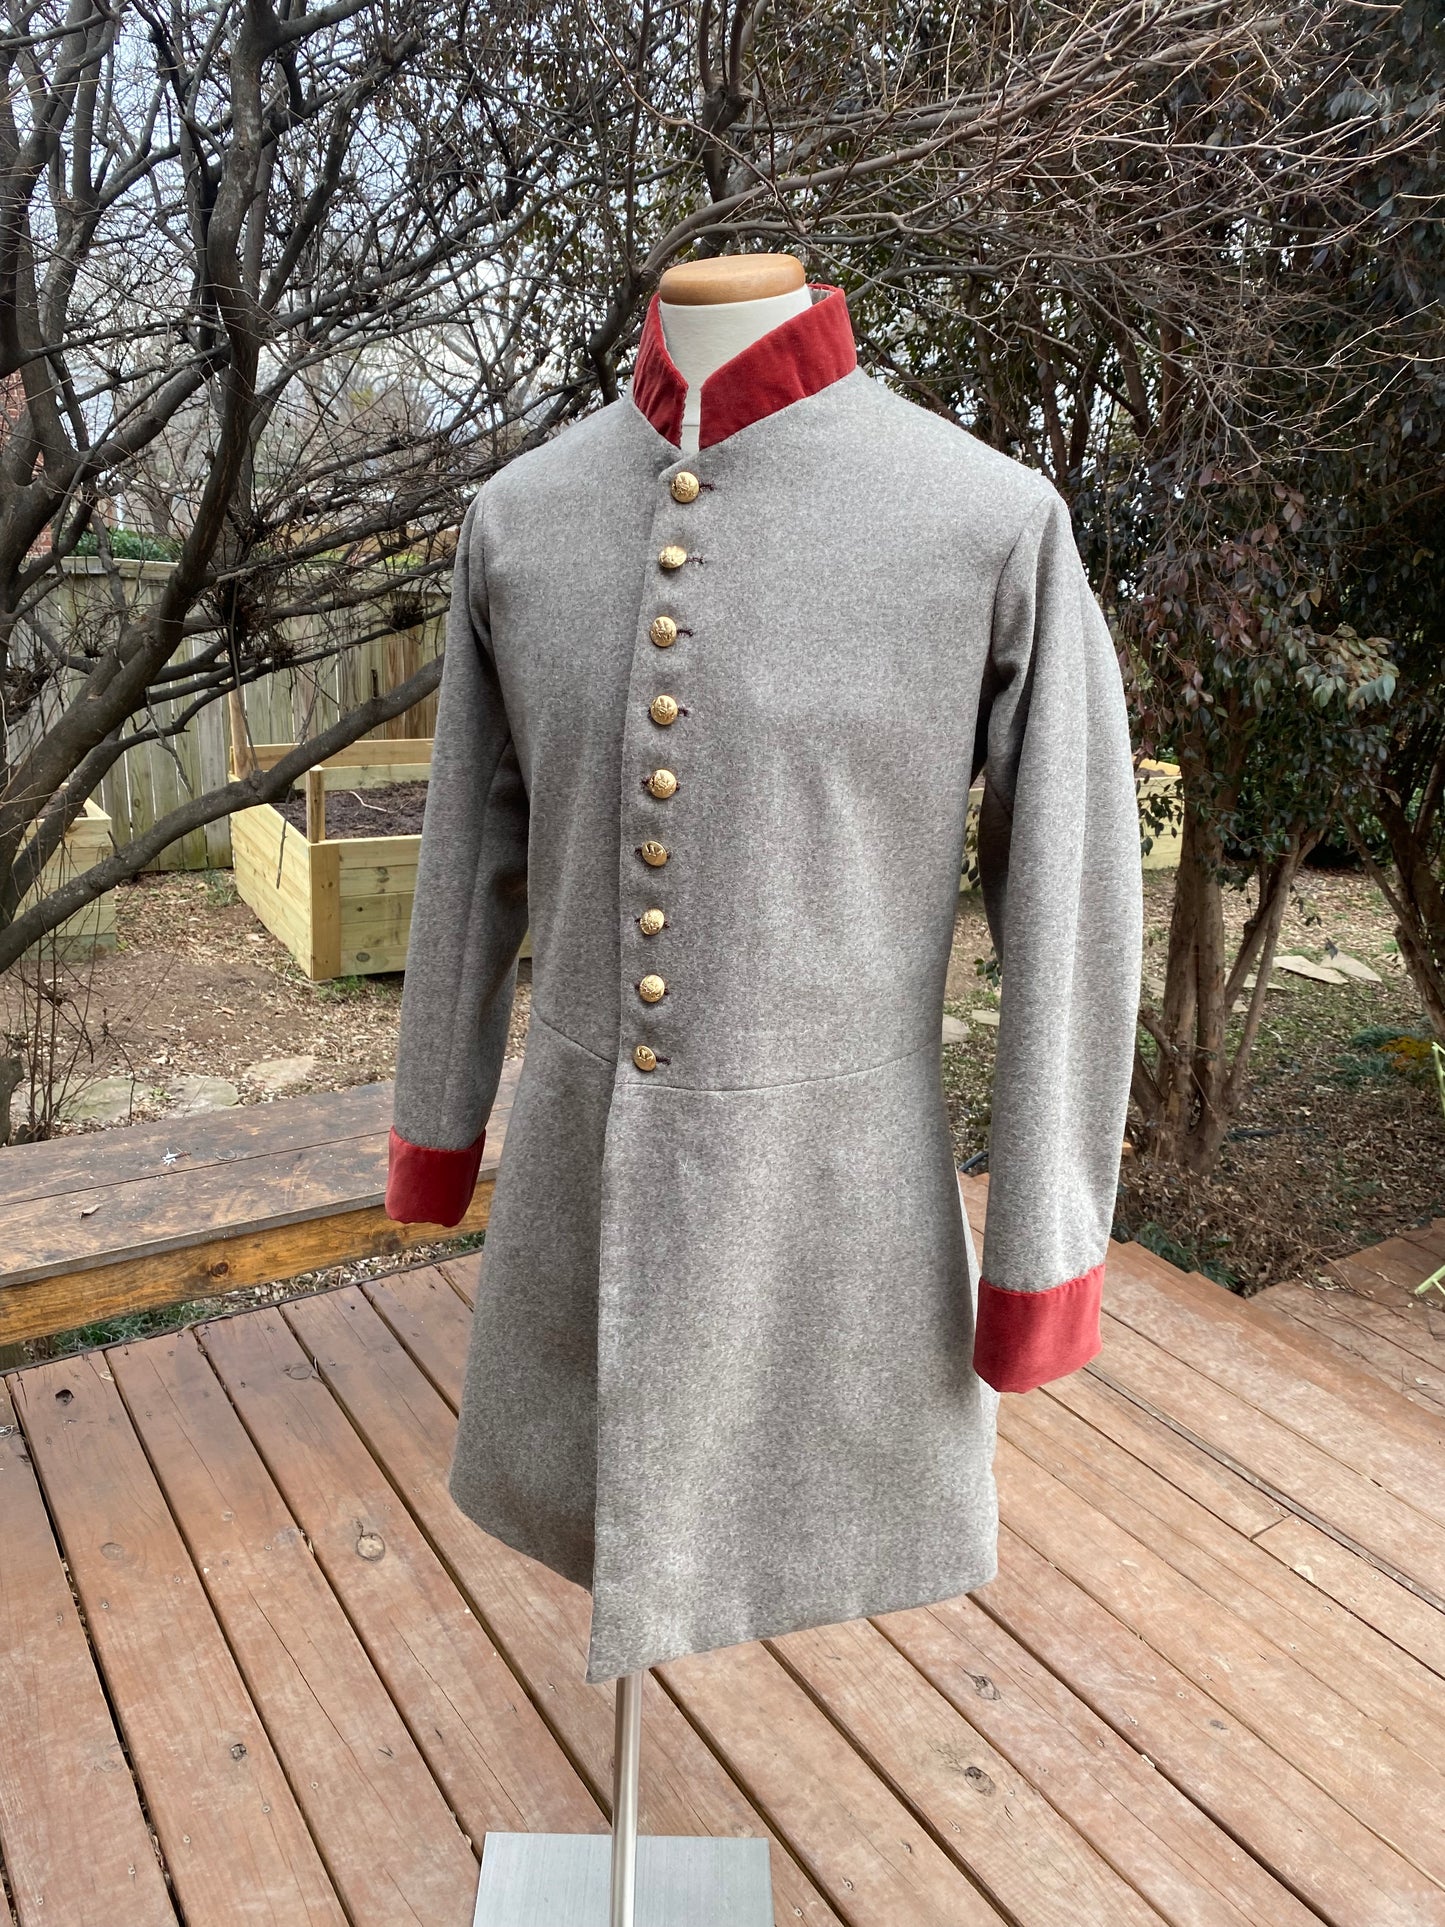 Tennessee Artillery State Frock Coat 1861-1862